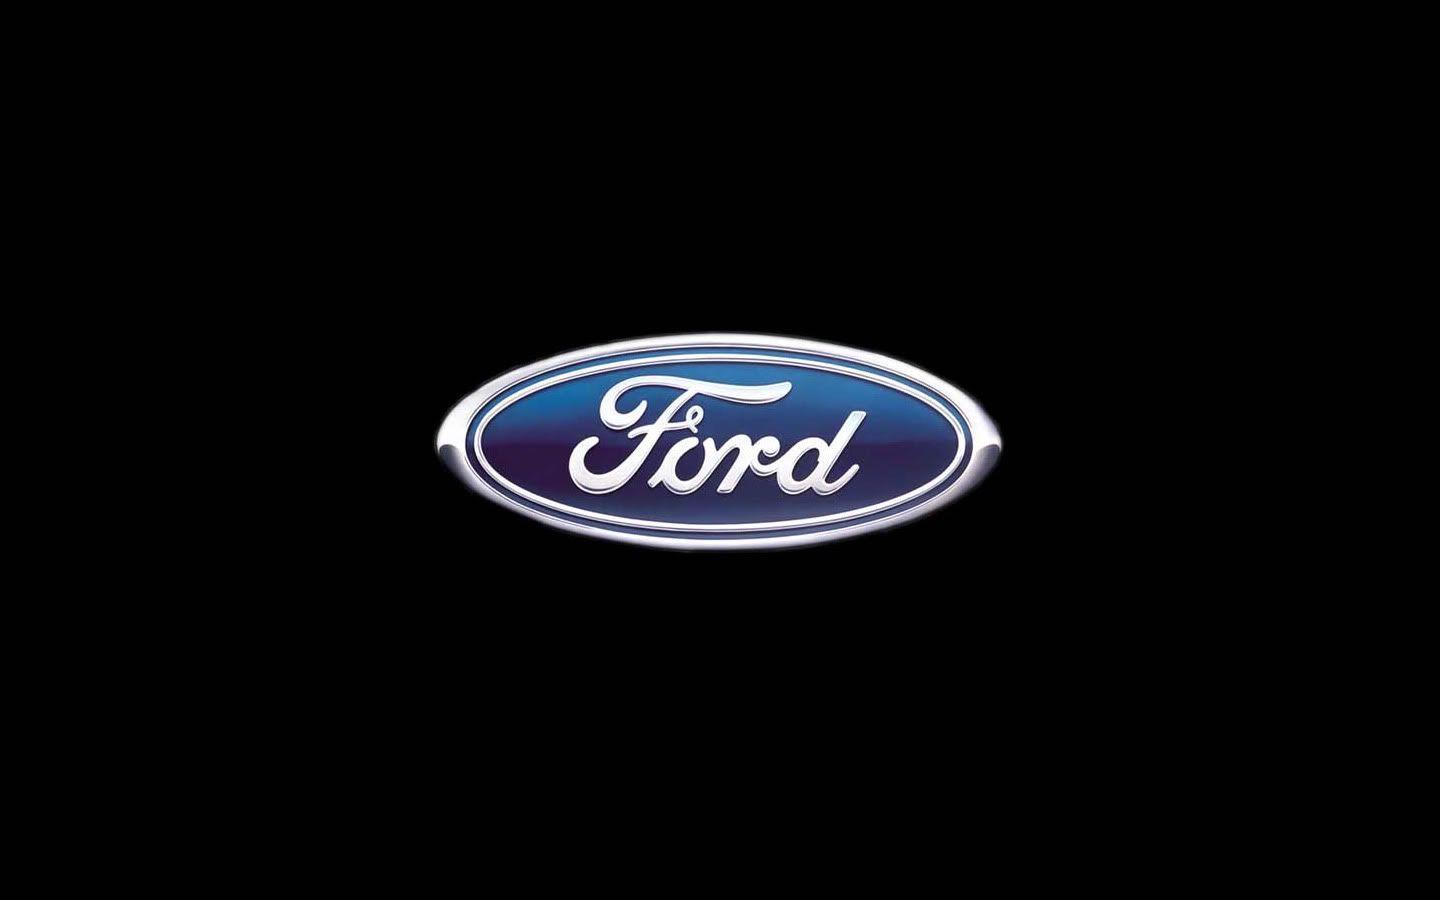 Ford Car Company Logo HD Wallpaper Download For Free. HD